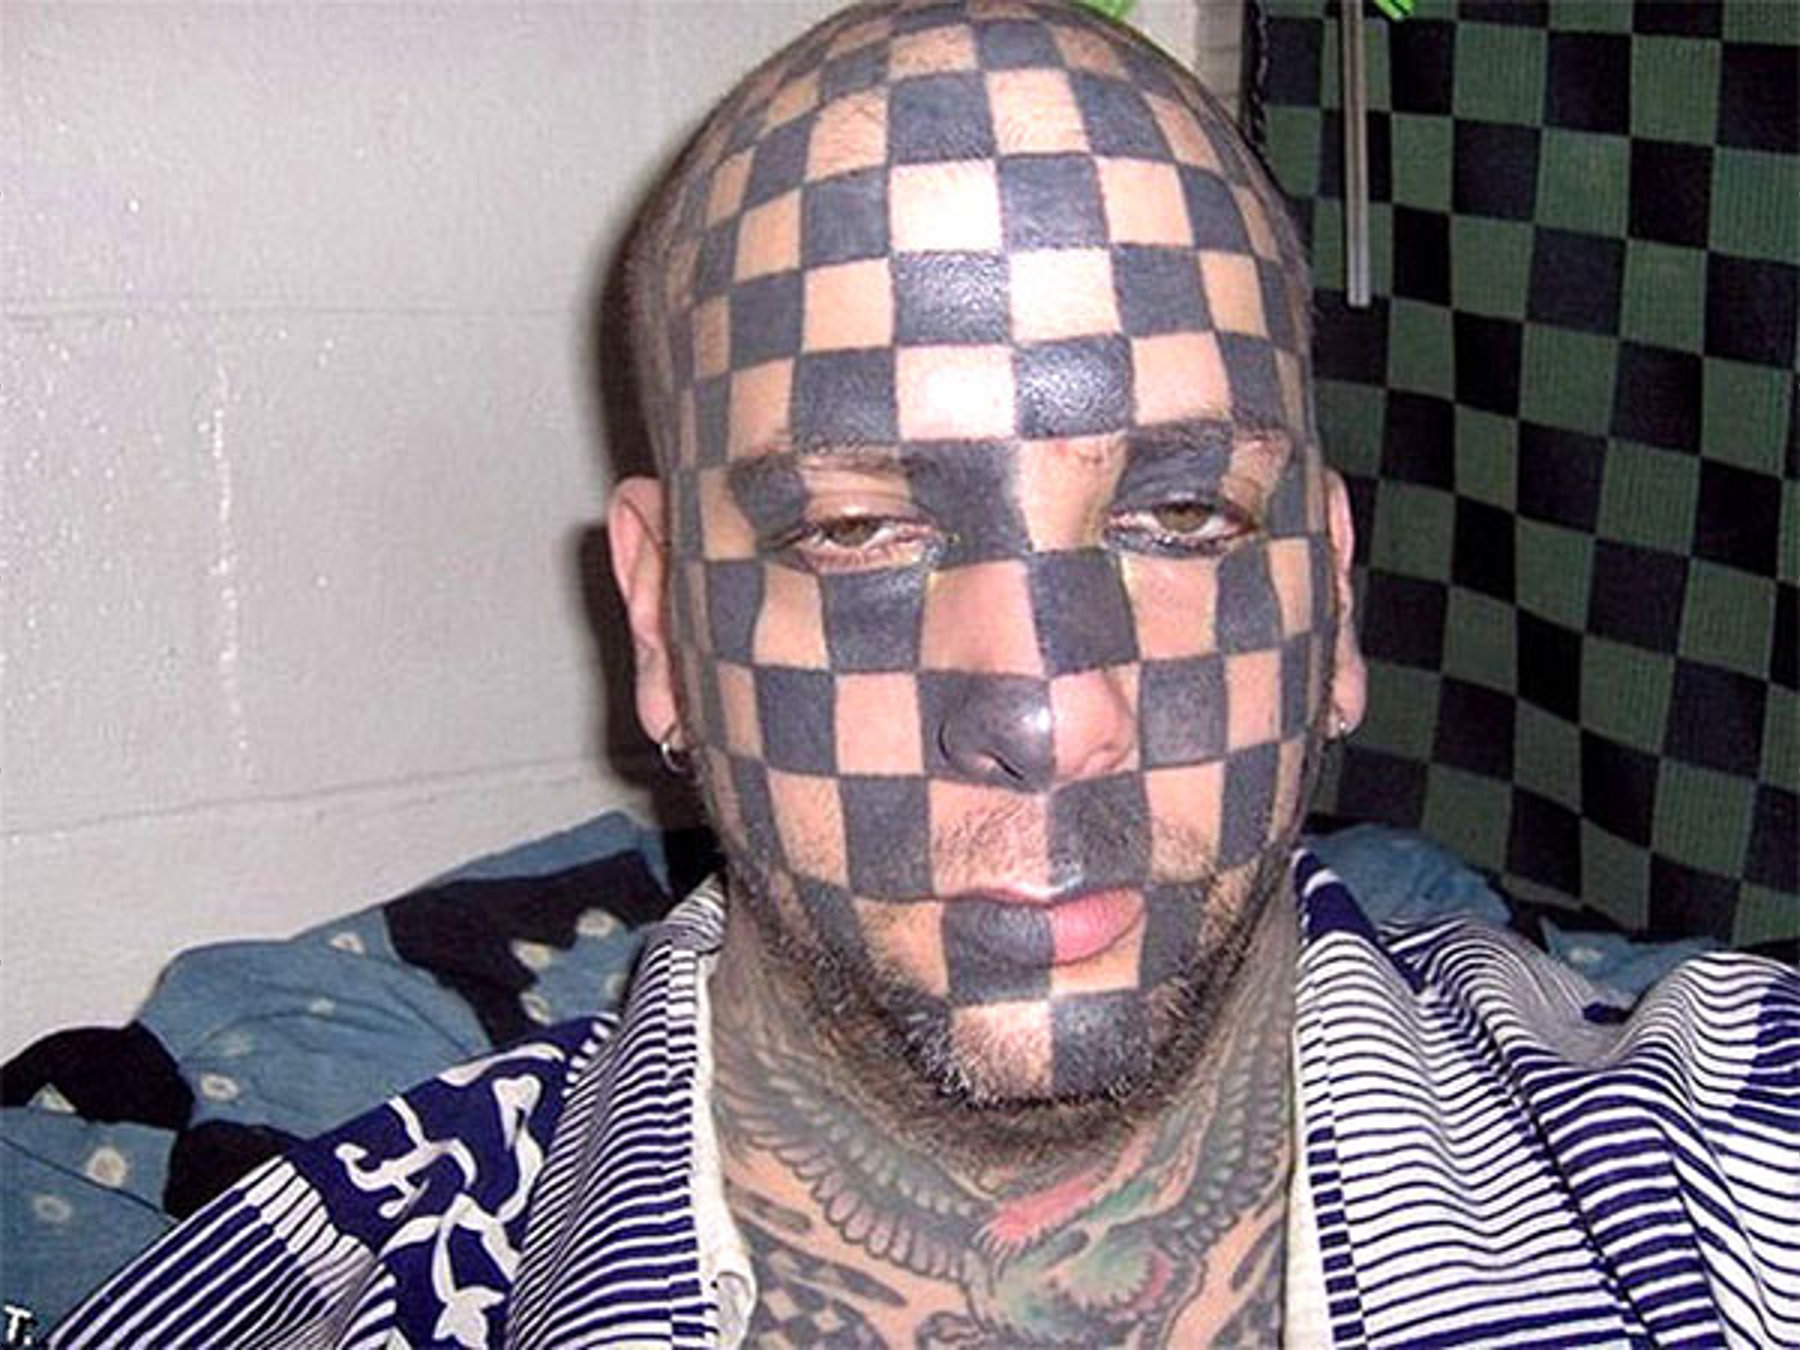 Don't get the checkerboard camouflage tat... checker's are so last year. Everyone's playing pie face now, plan accordingly.